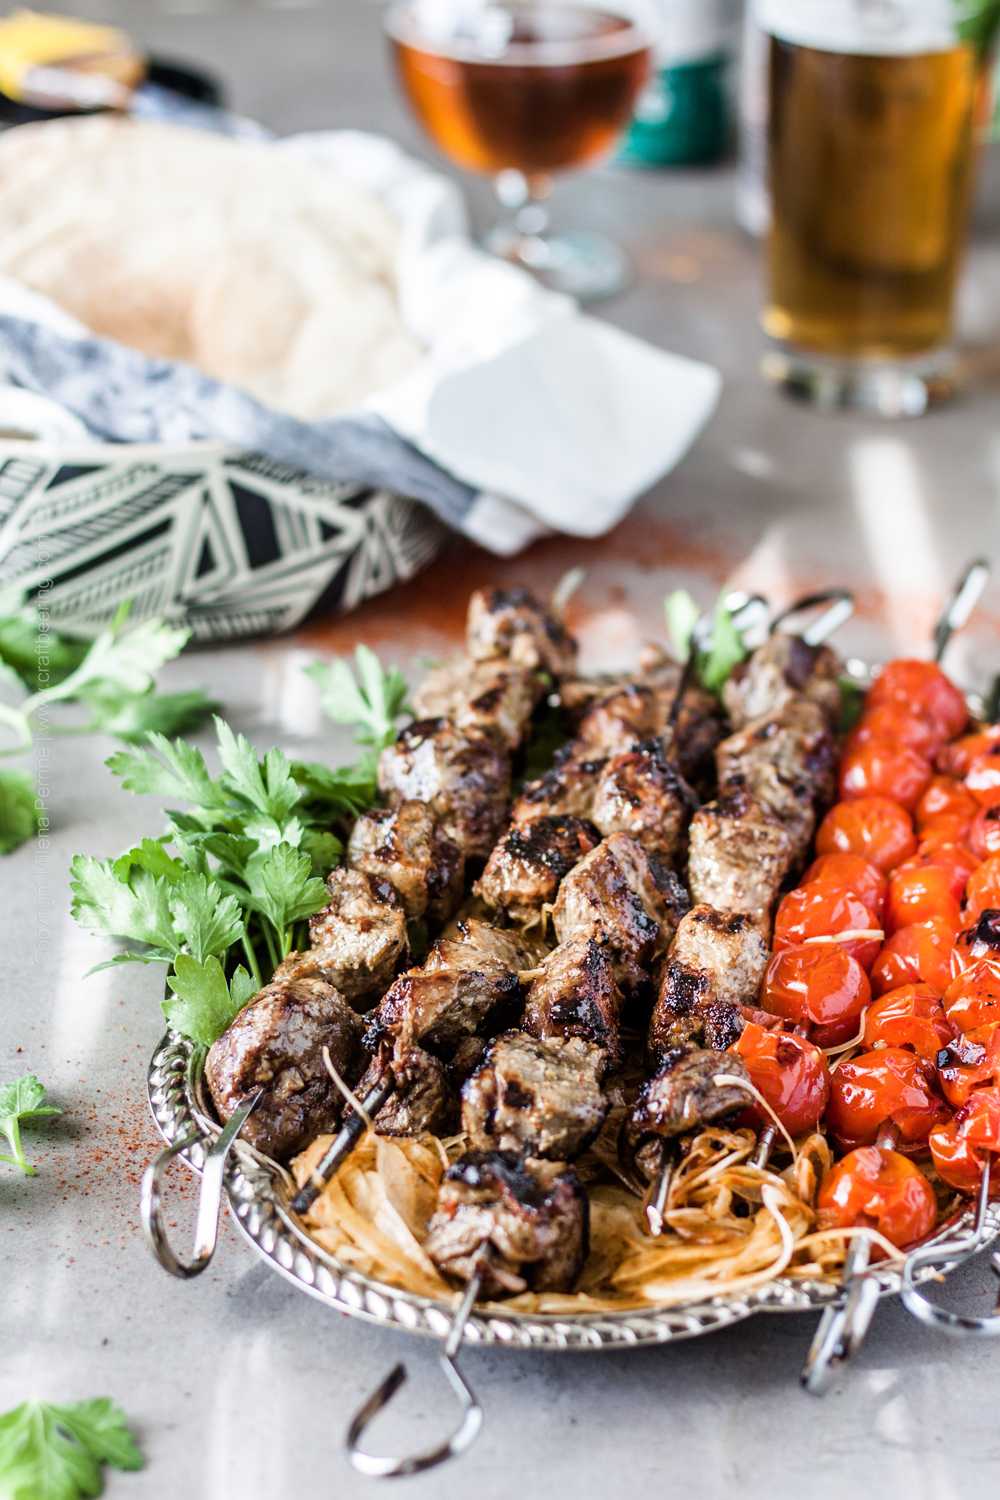 Platter with lamb shish kebab traditionally presented with roasted toamato skewers, shaved onions and sumac, parsley and flat bread.